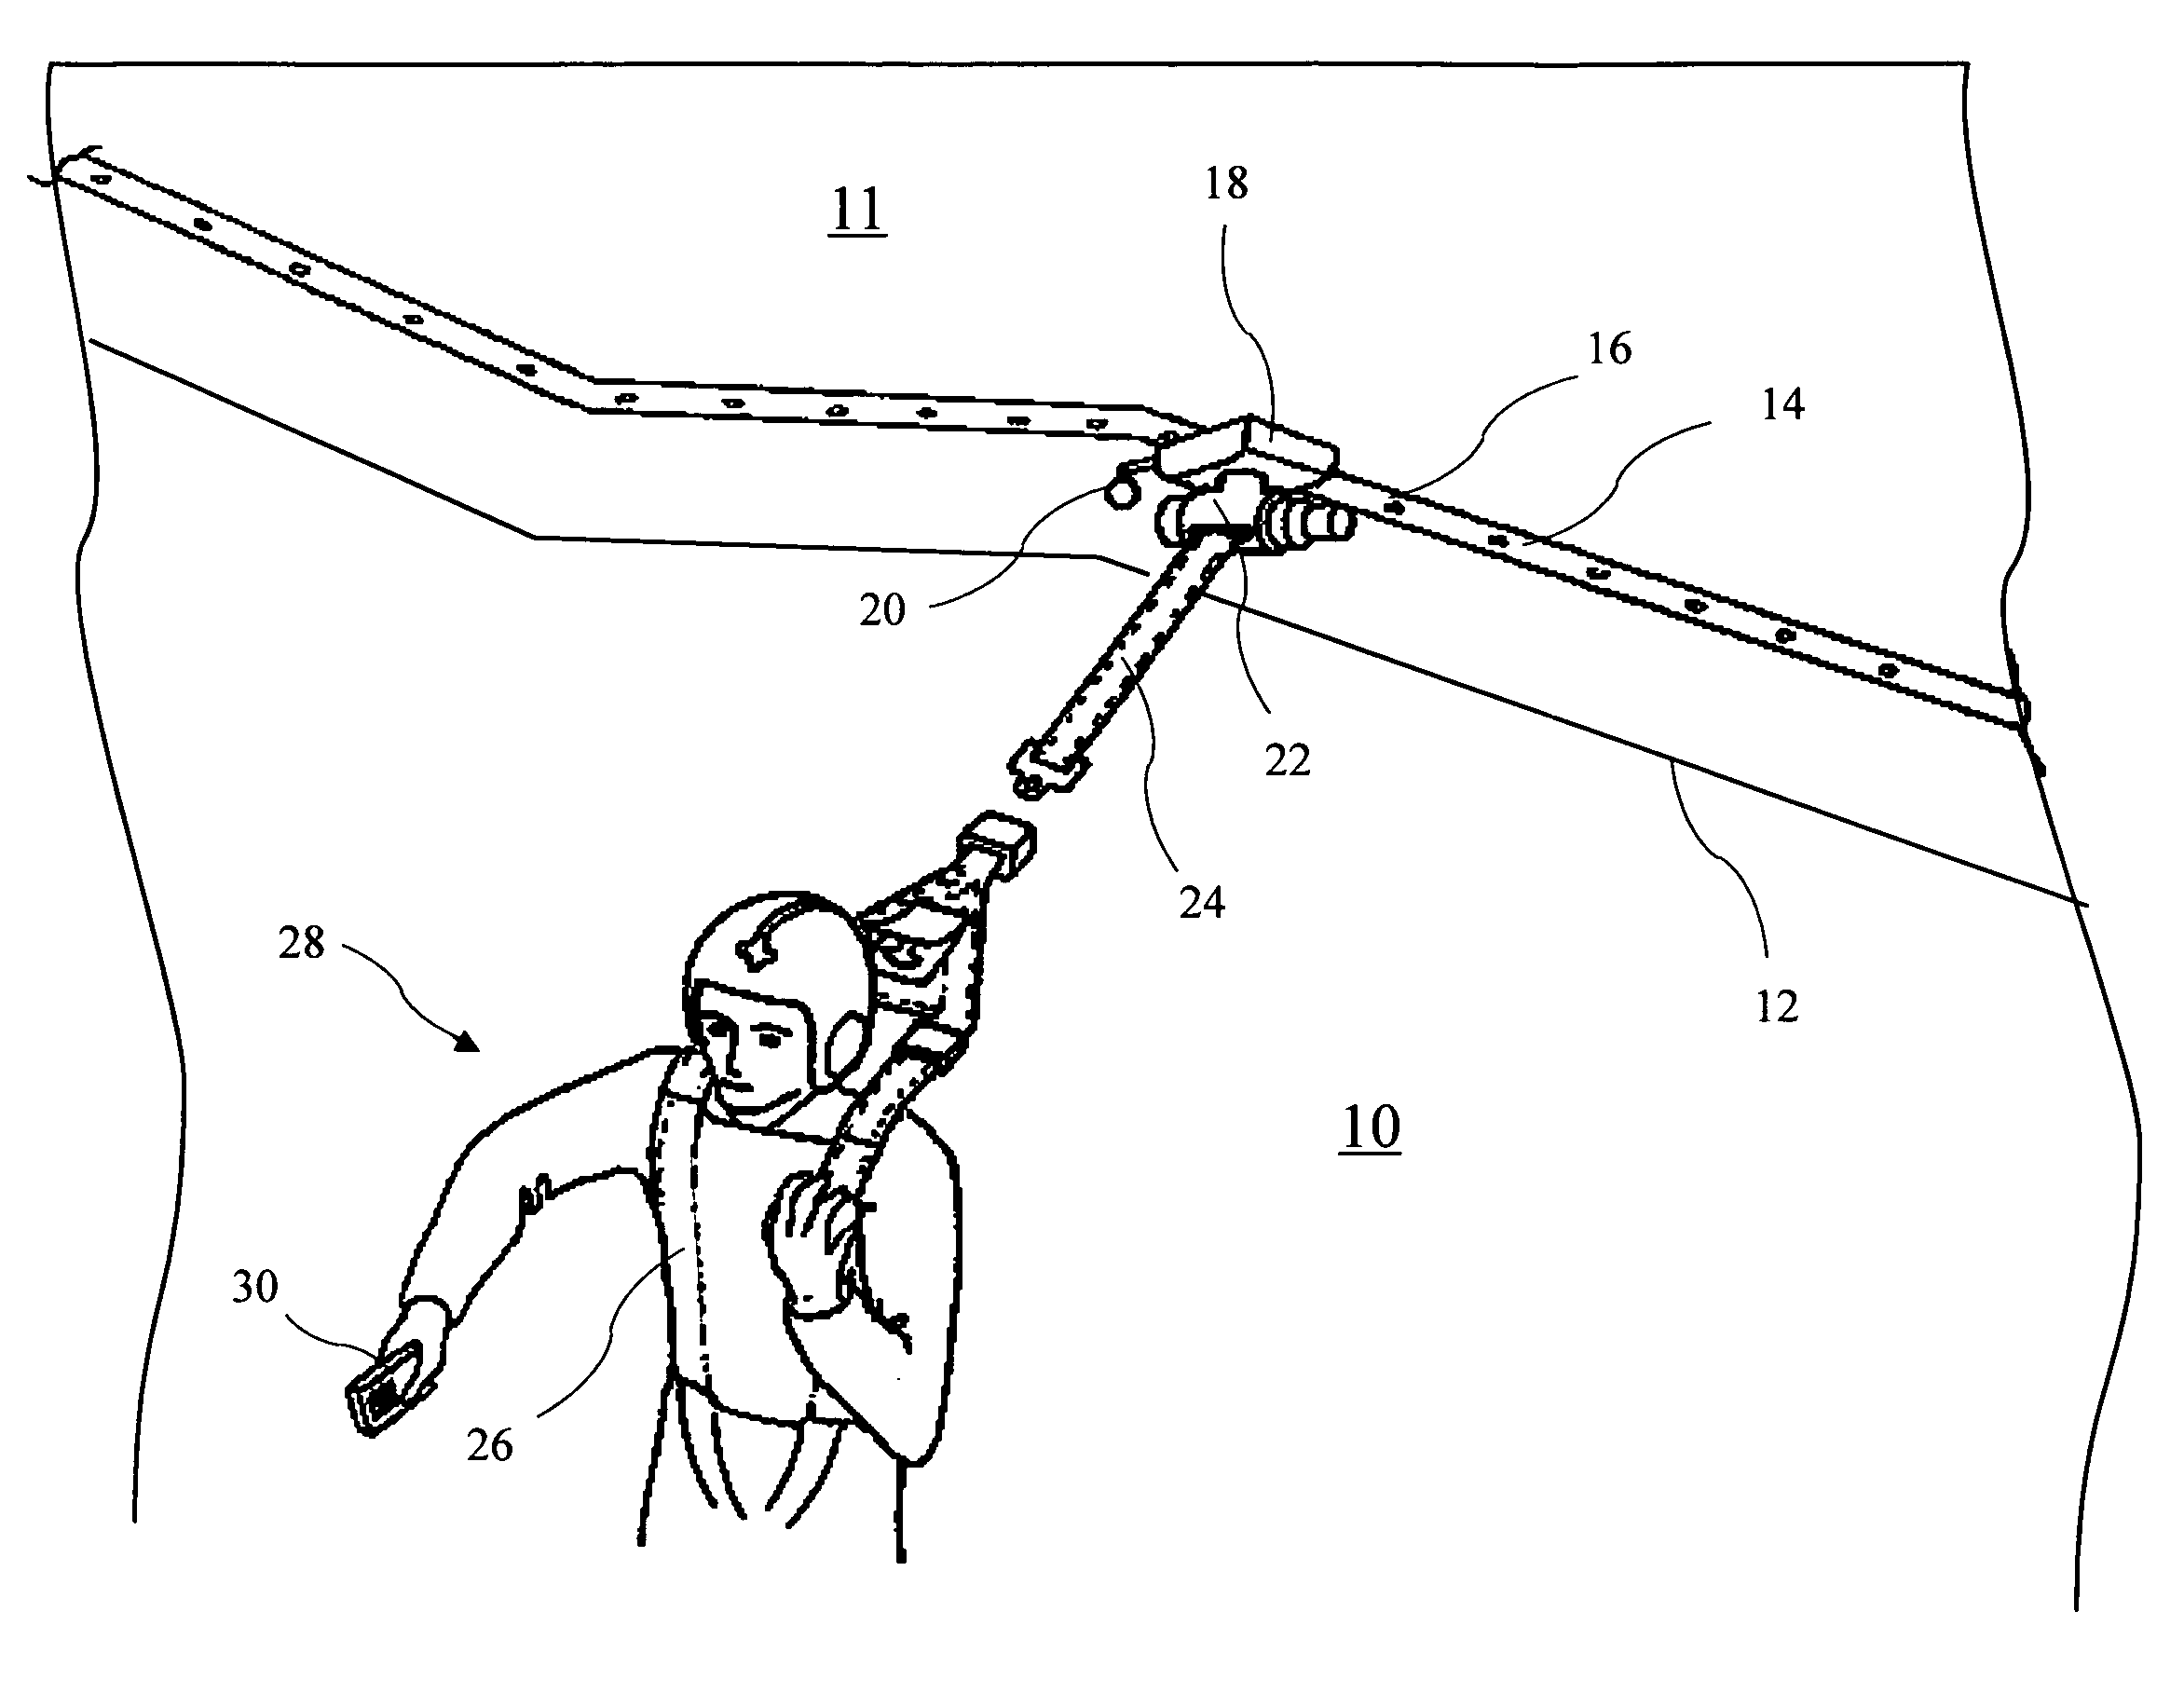 Aircrew restraint system